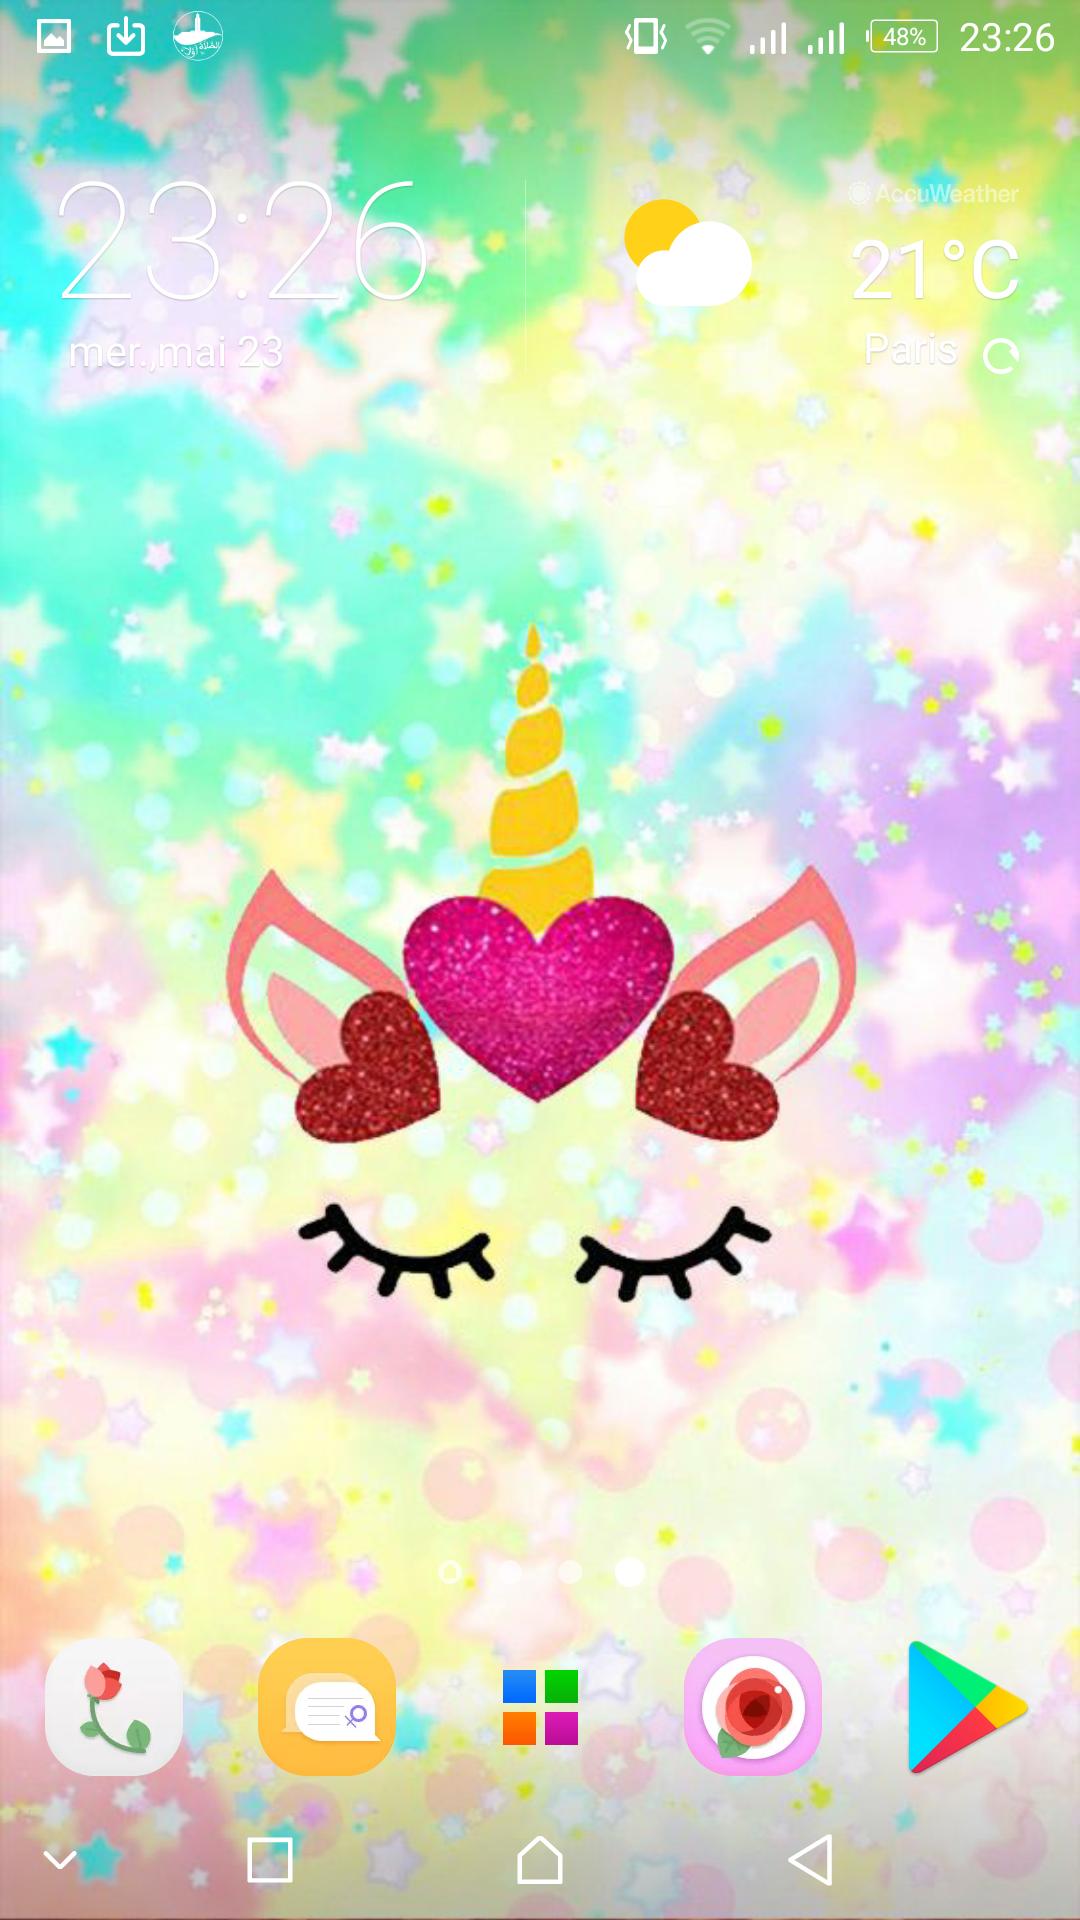 Imut Unicorn Kucing Gadis Wallpaper For Android APK Download